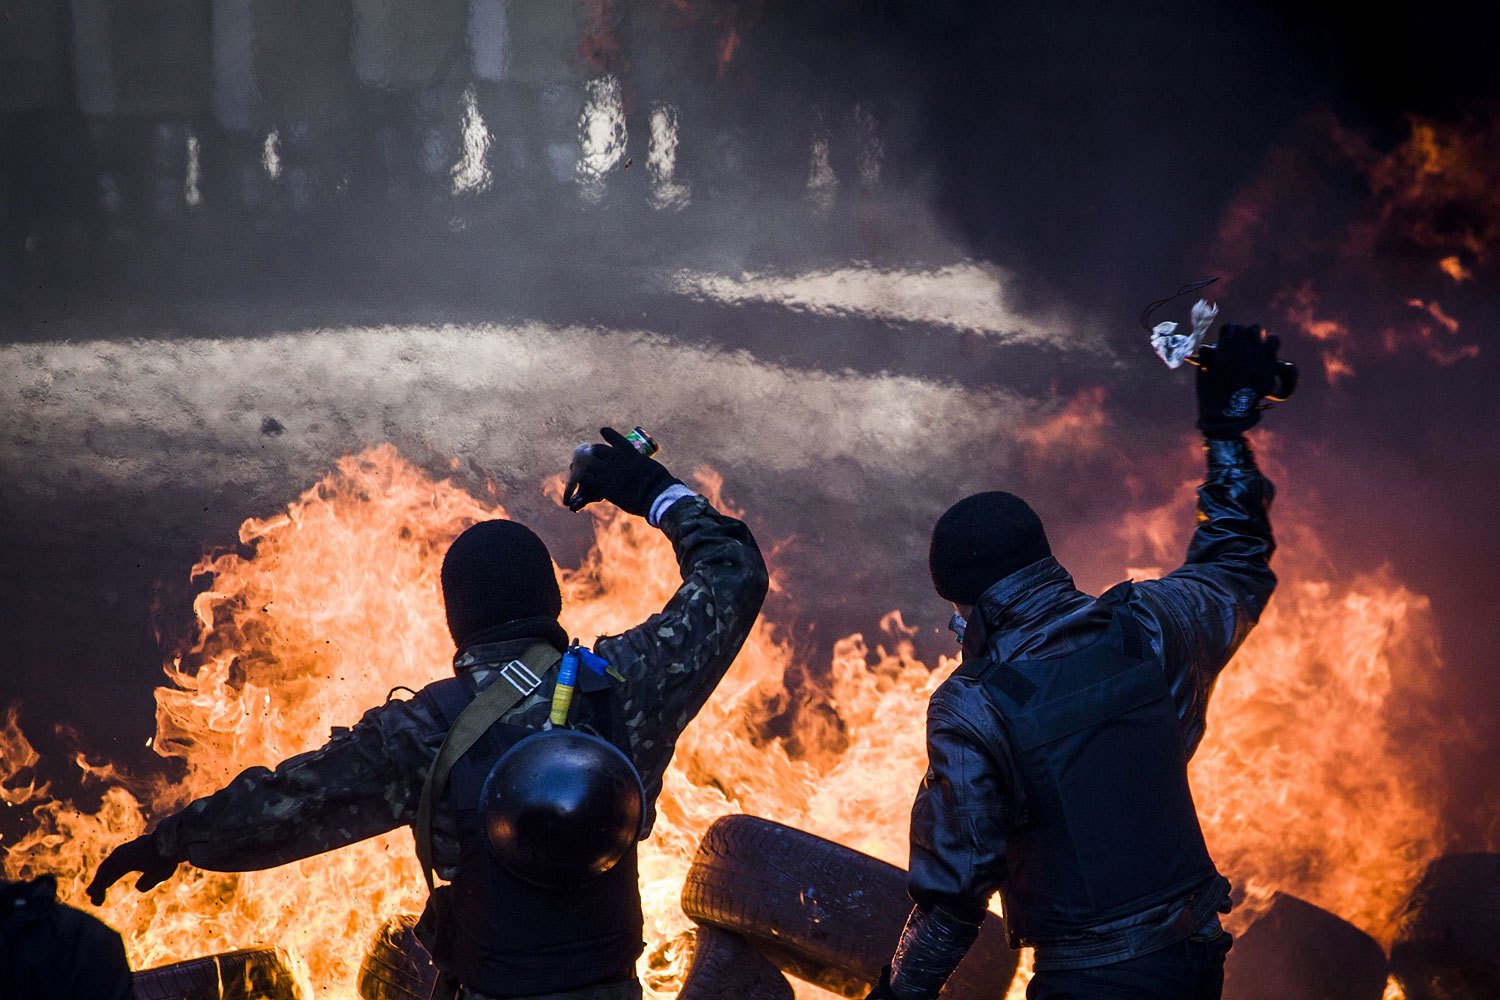 Anti-government demonstrators clash with riot police, Feb. 18, 2014.